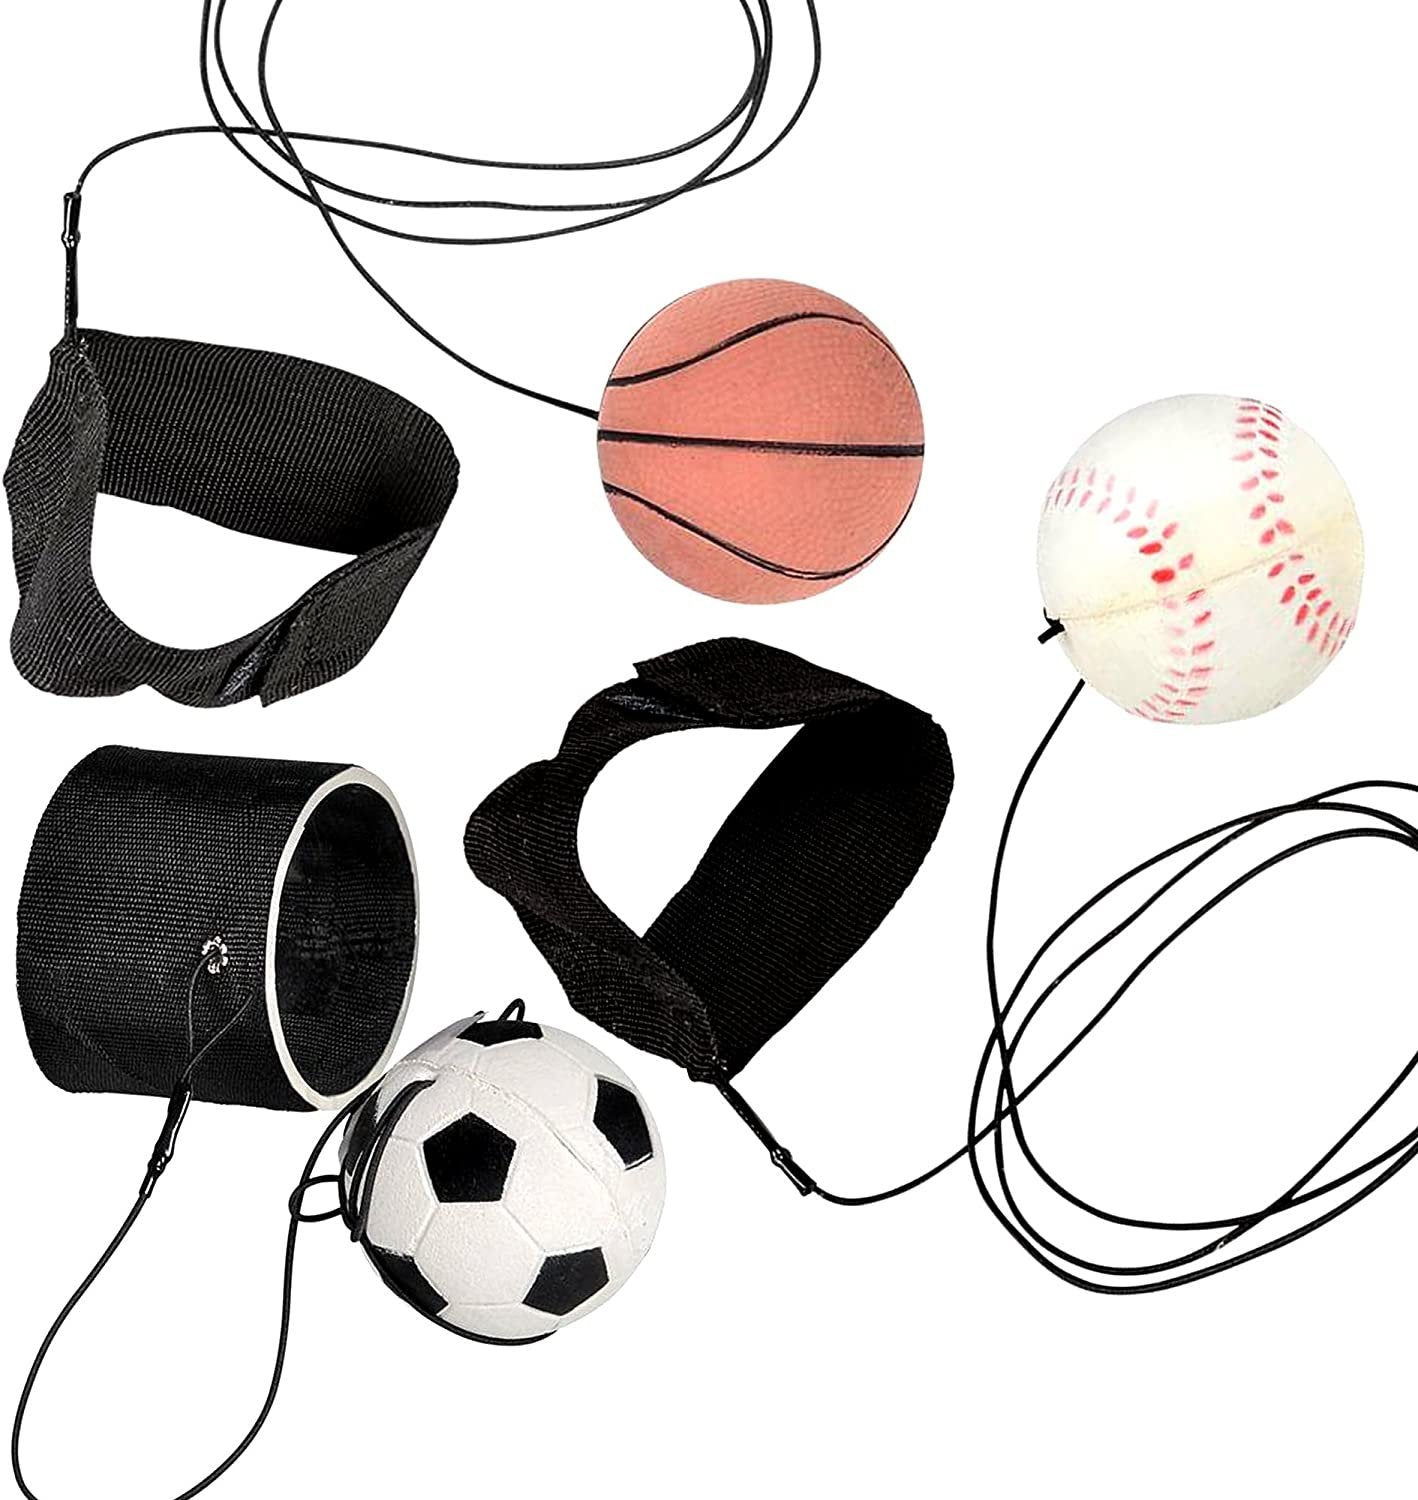 ArtCreativity 2.25 Inch Sports Wrist Balls - Set of 3 - Includes Basketball, Baseball, and Soccer Ball Wristband Toys - Durable Foam String Attached Rebound Balls - Party Favor, Gift Idea for Kids